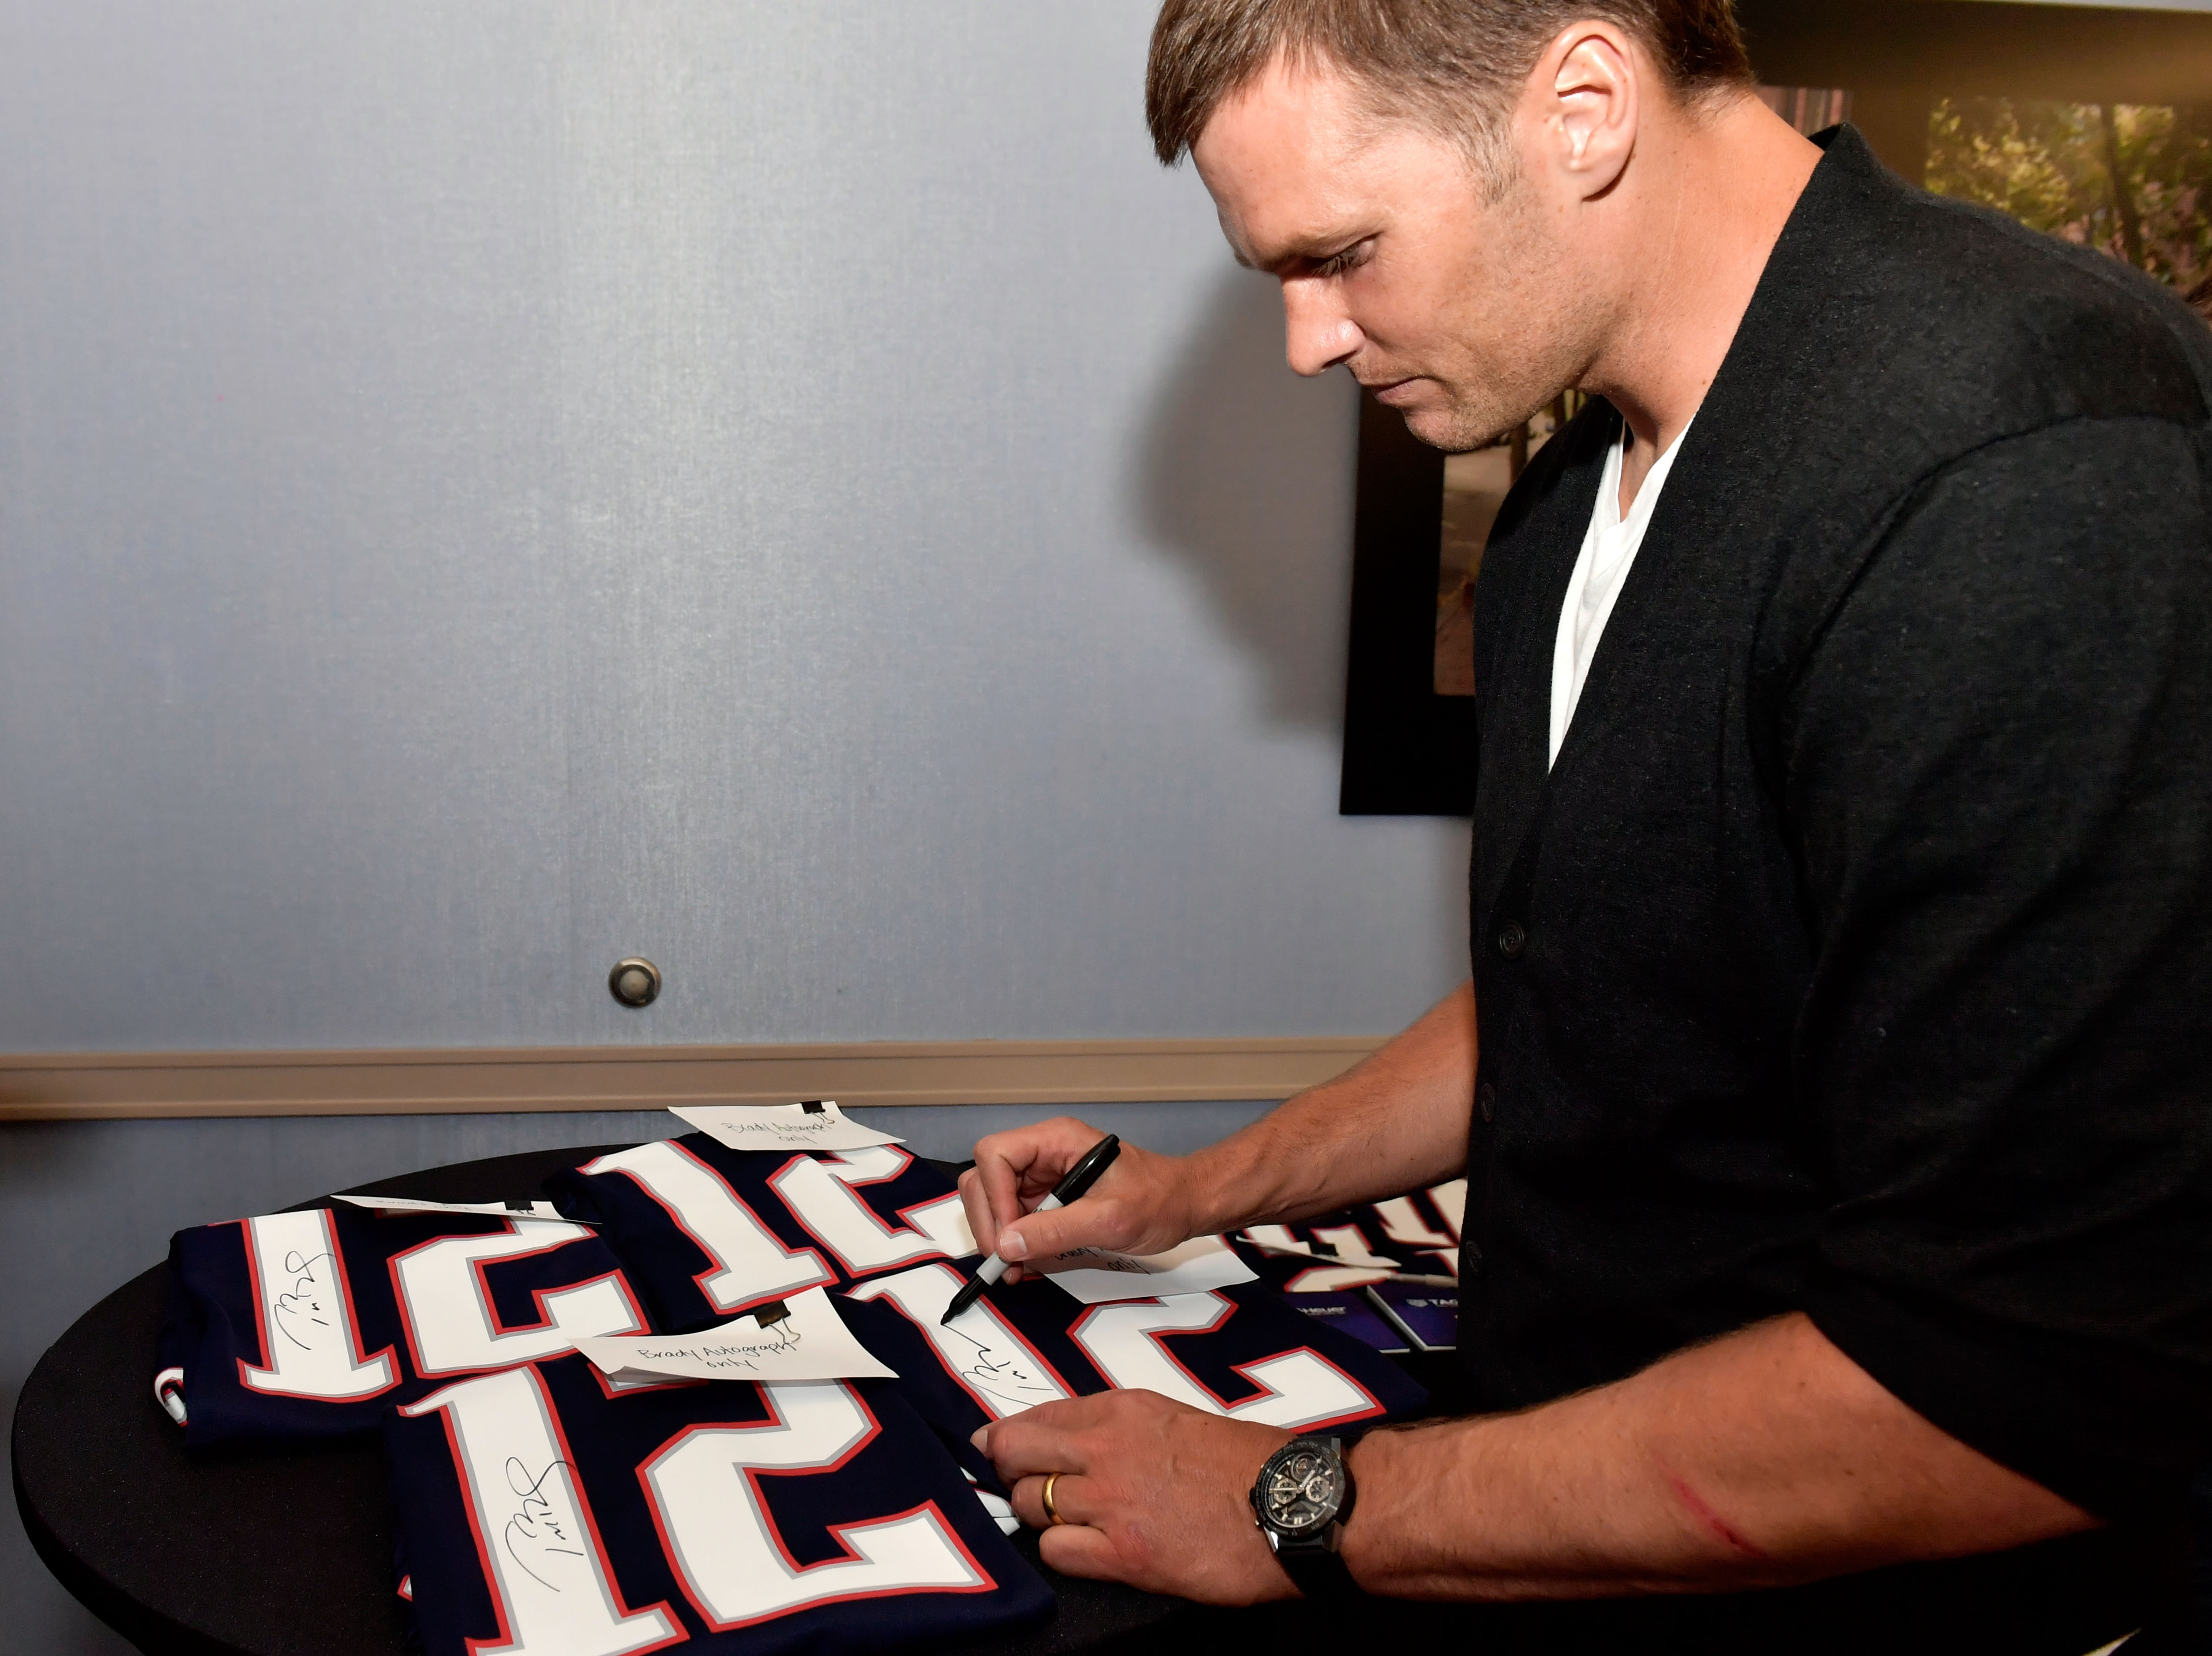 Tom Brady’s Autographed Rookie Card Sold for $556,000: ‘The Single Most Important Modern Football Card’